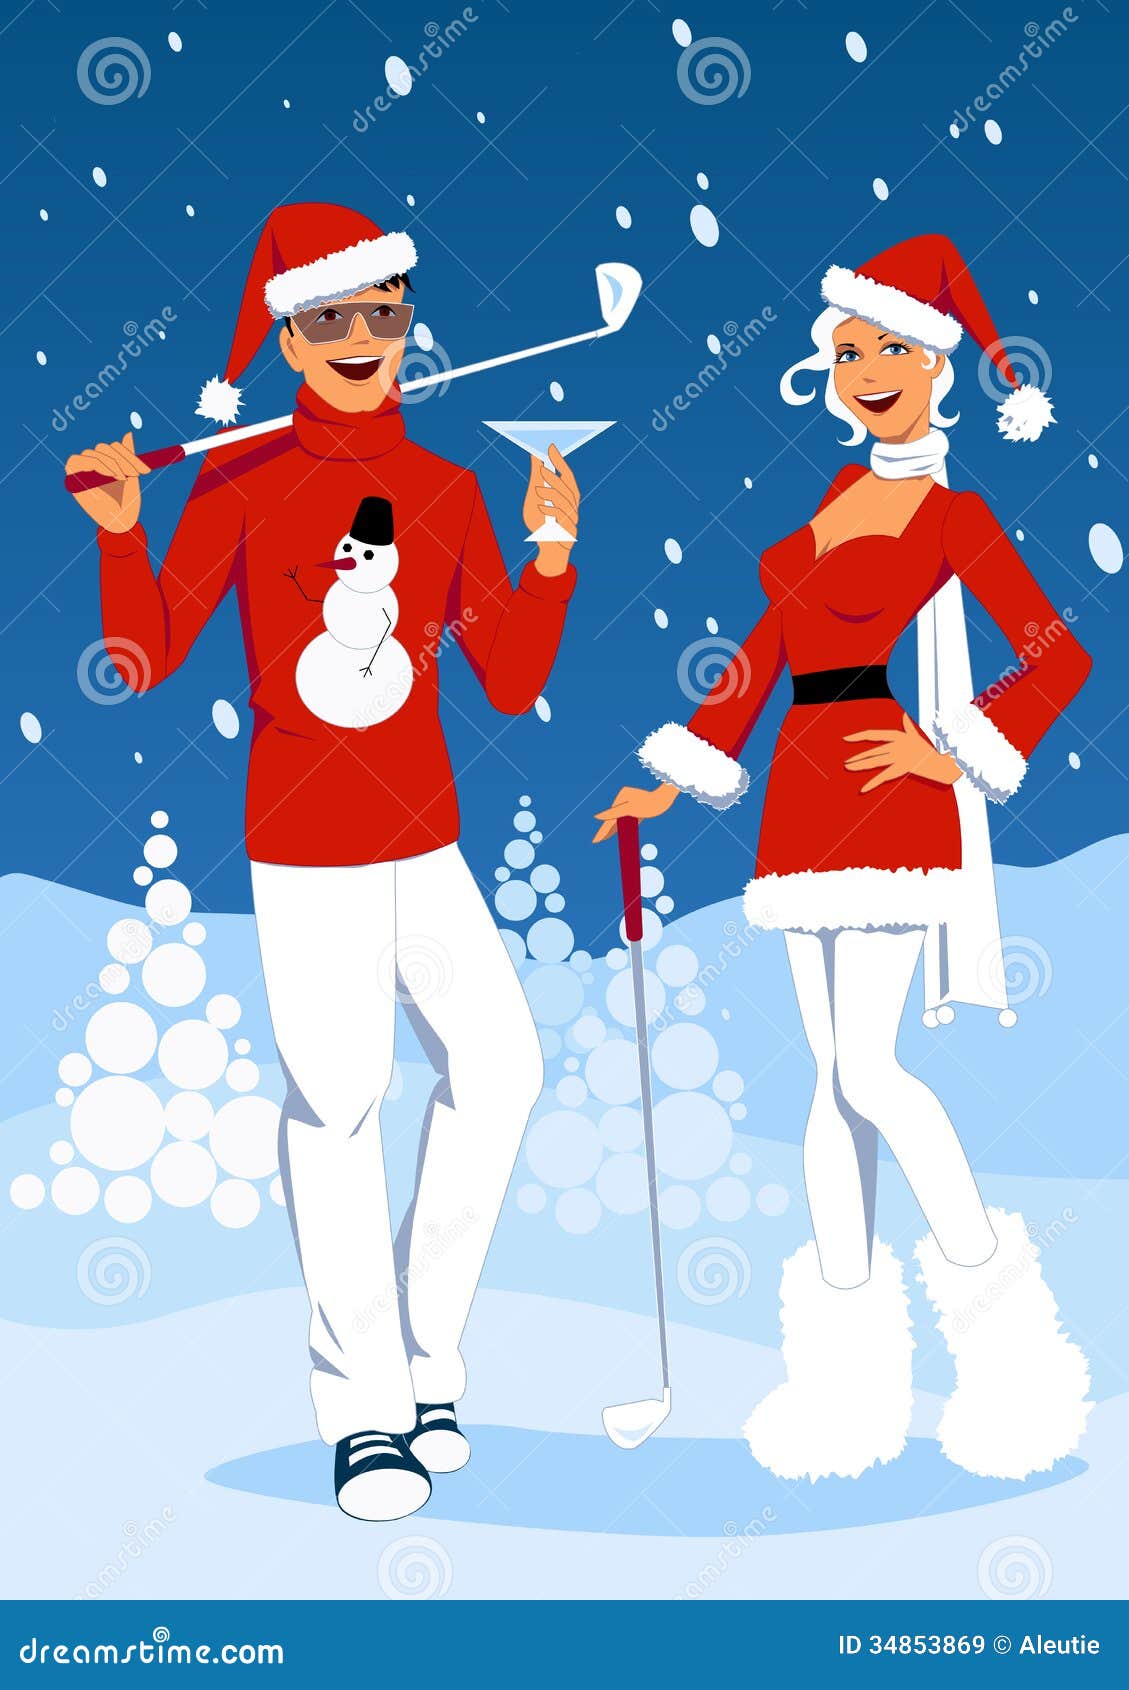 Golf On Christmas Royalty Free Stock Images - Image: 34853869